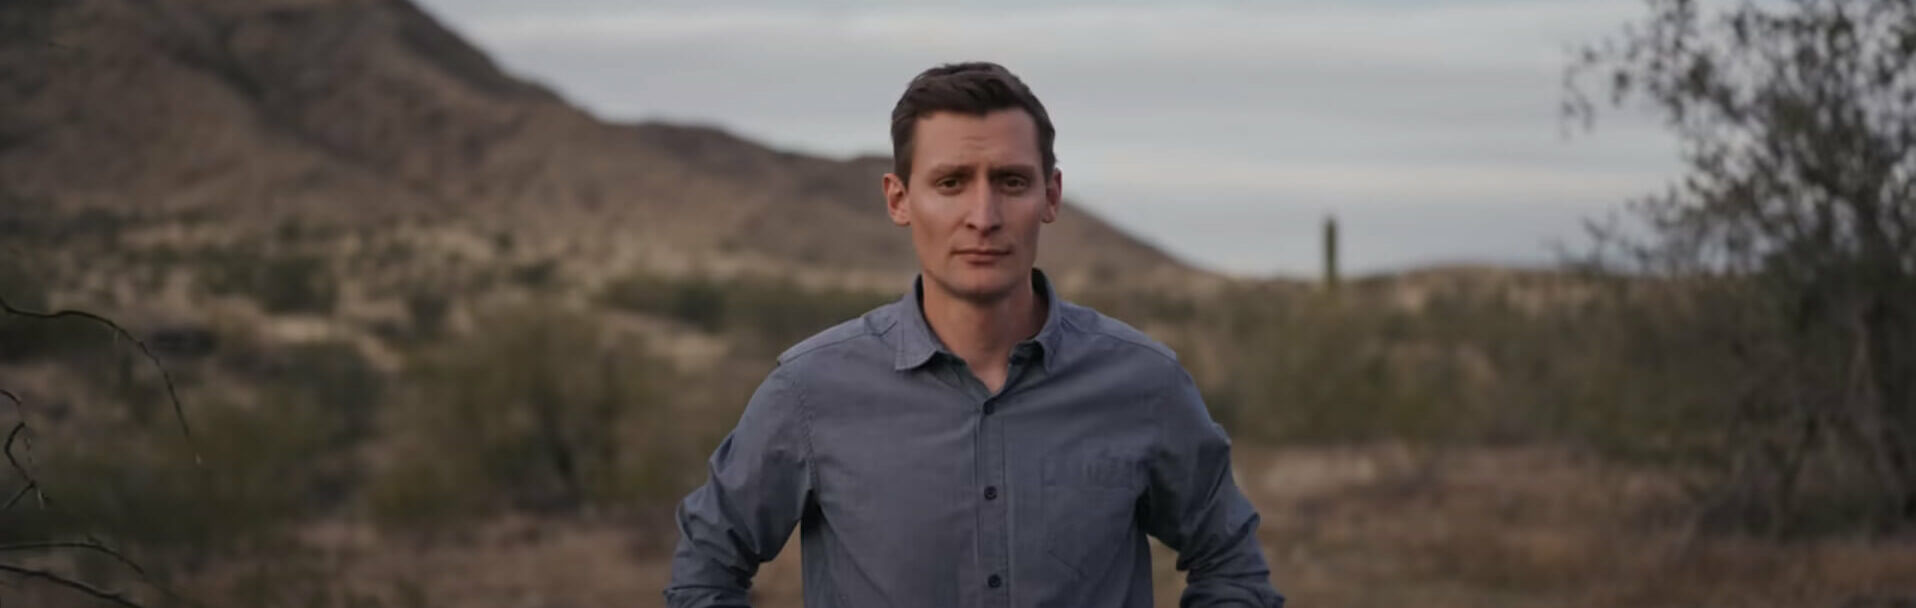 Blake Masters Takes a Clear Lead in Arizona Senate Primary Race in New